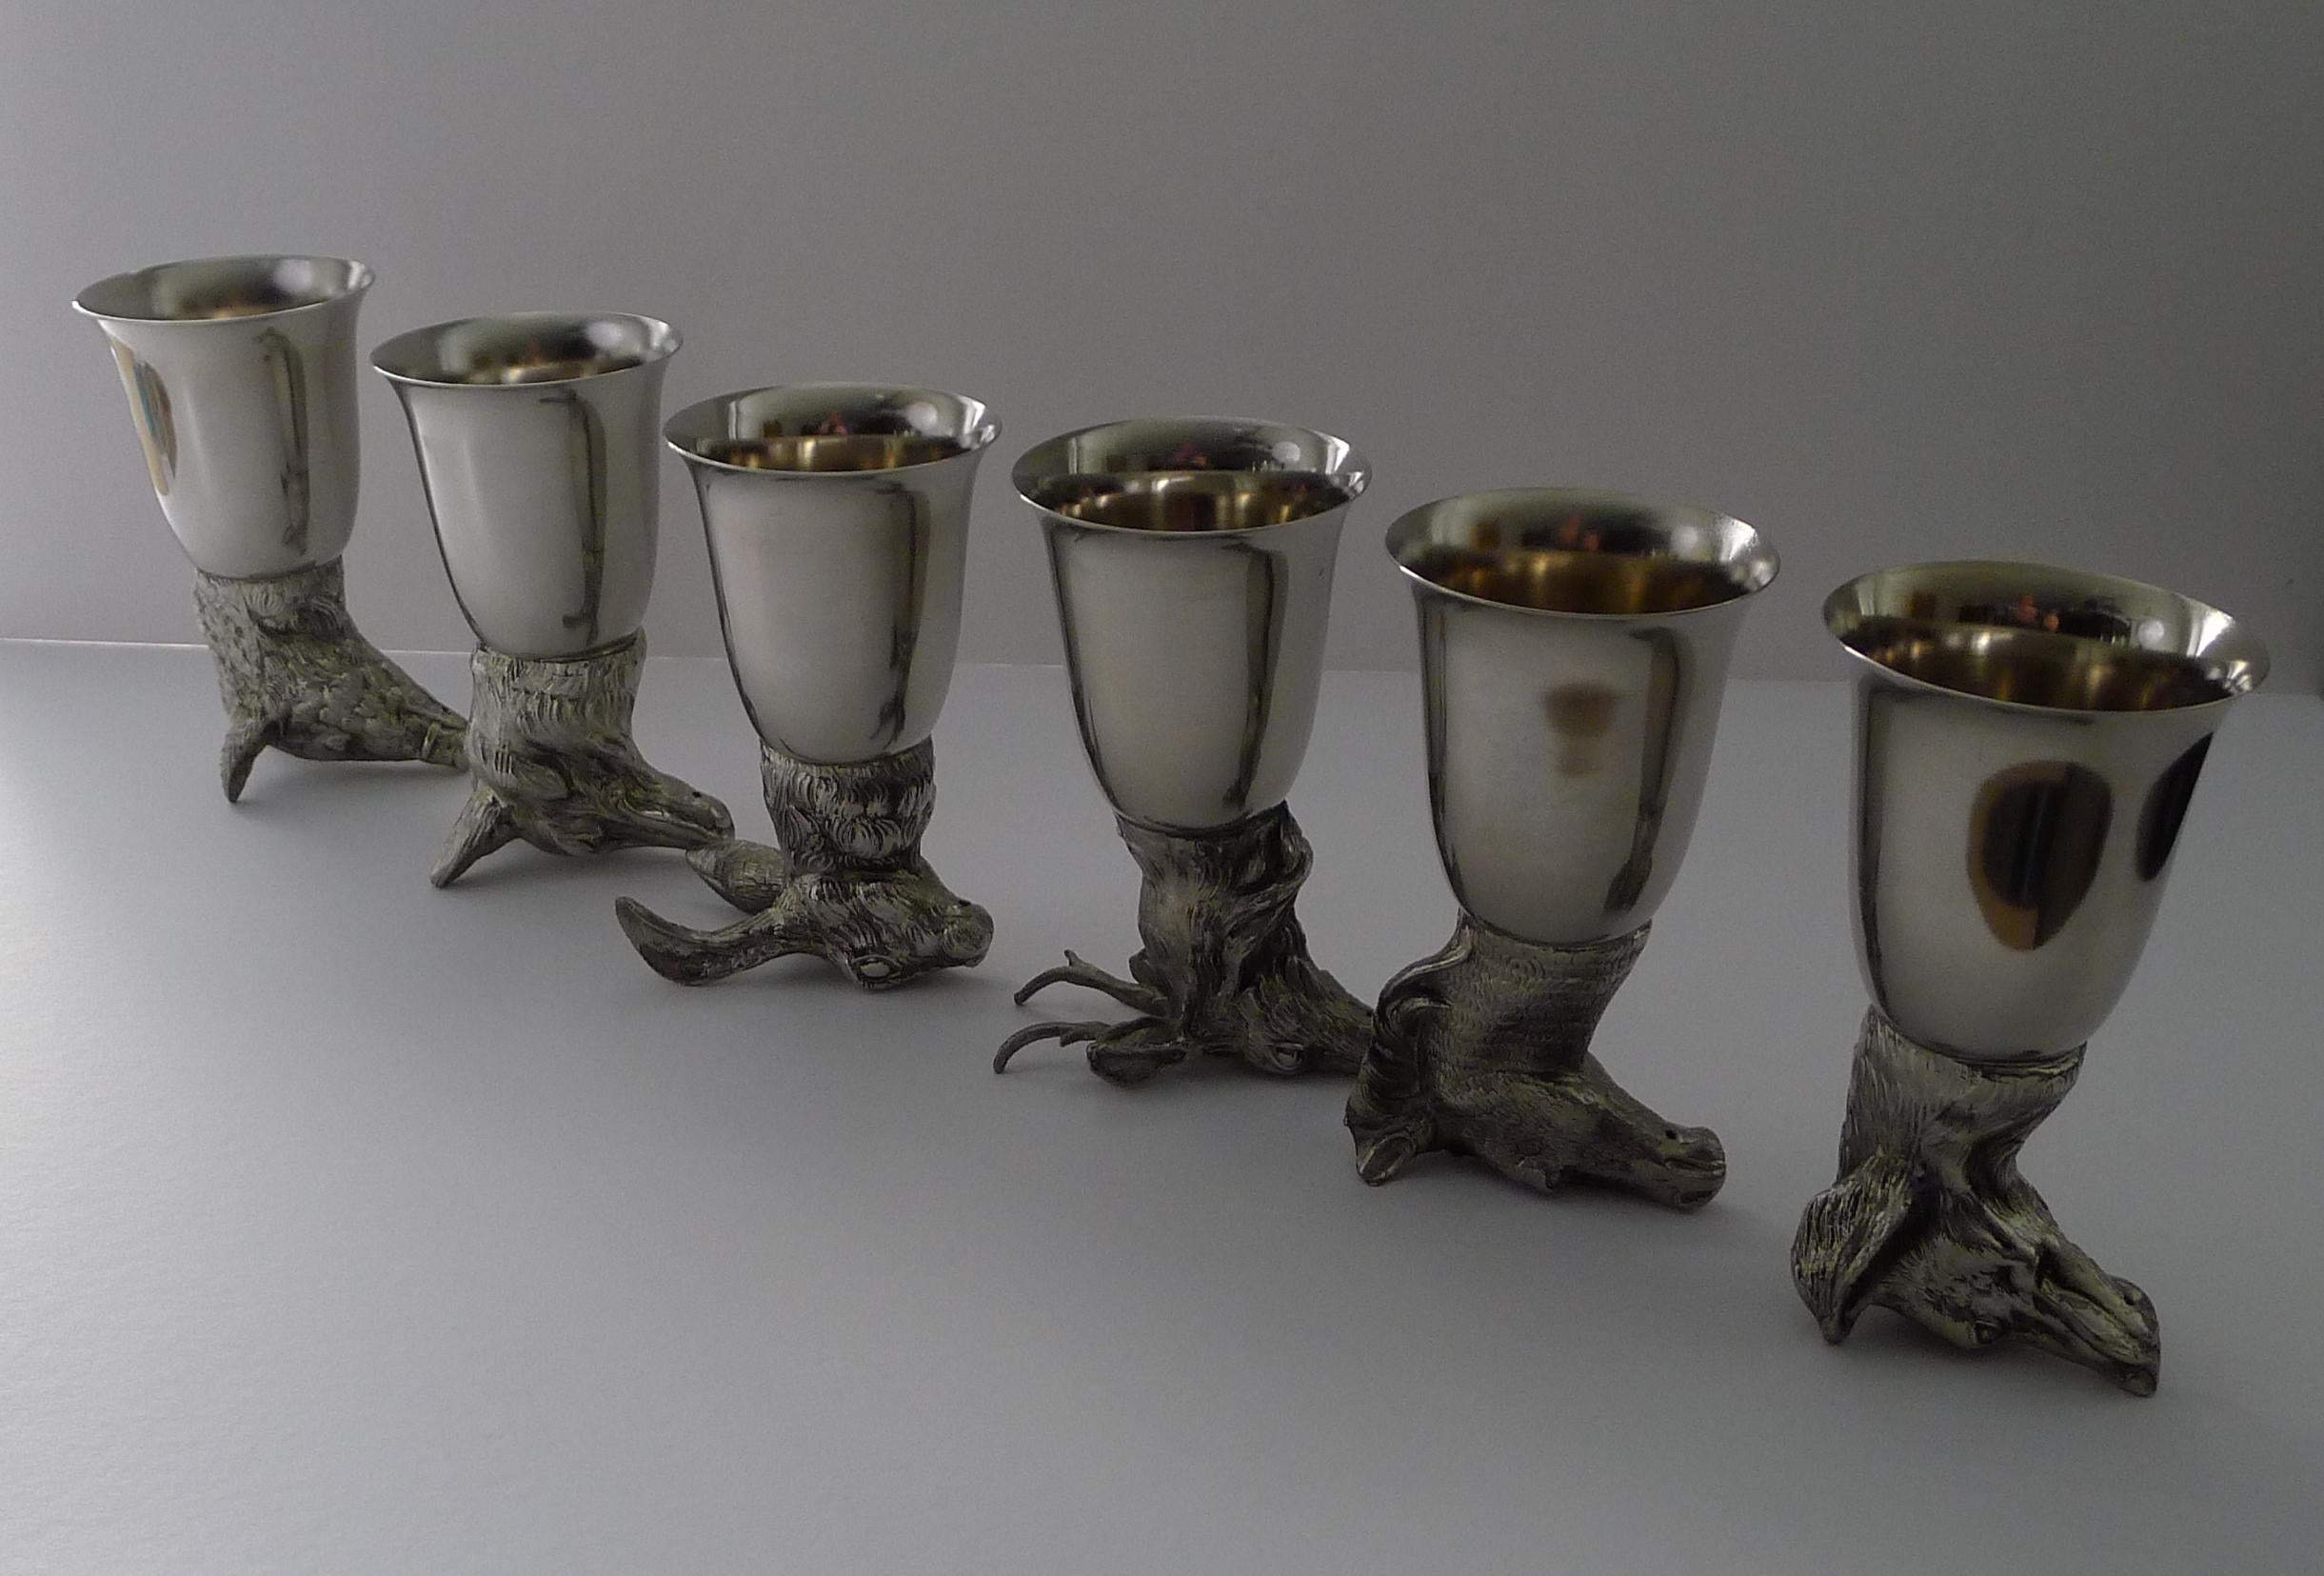 A stunning set six figural hunting stirrup cups in silver plate, made by the iconic Italian designer, Mauro Manetti.

The six cups are in the form of animal heads:

Fox, Horse, Stag, Dog, Boar and Hare

Each is signed M/M and 